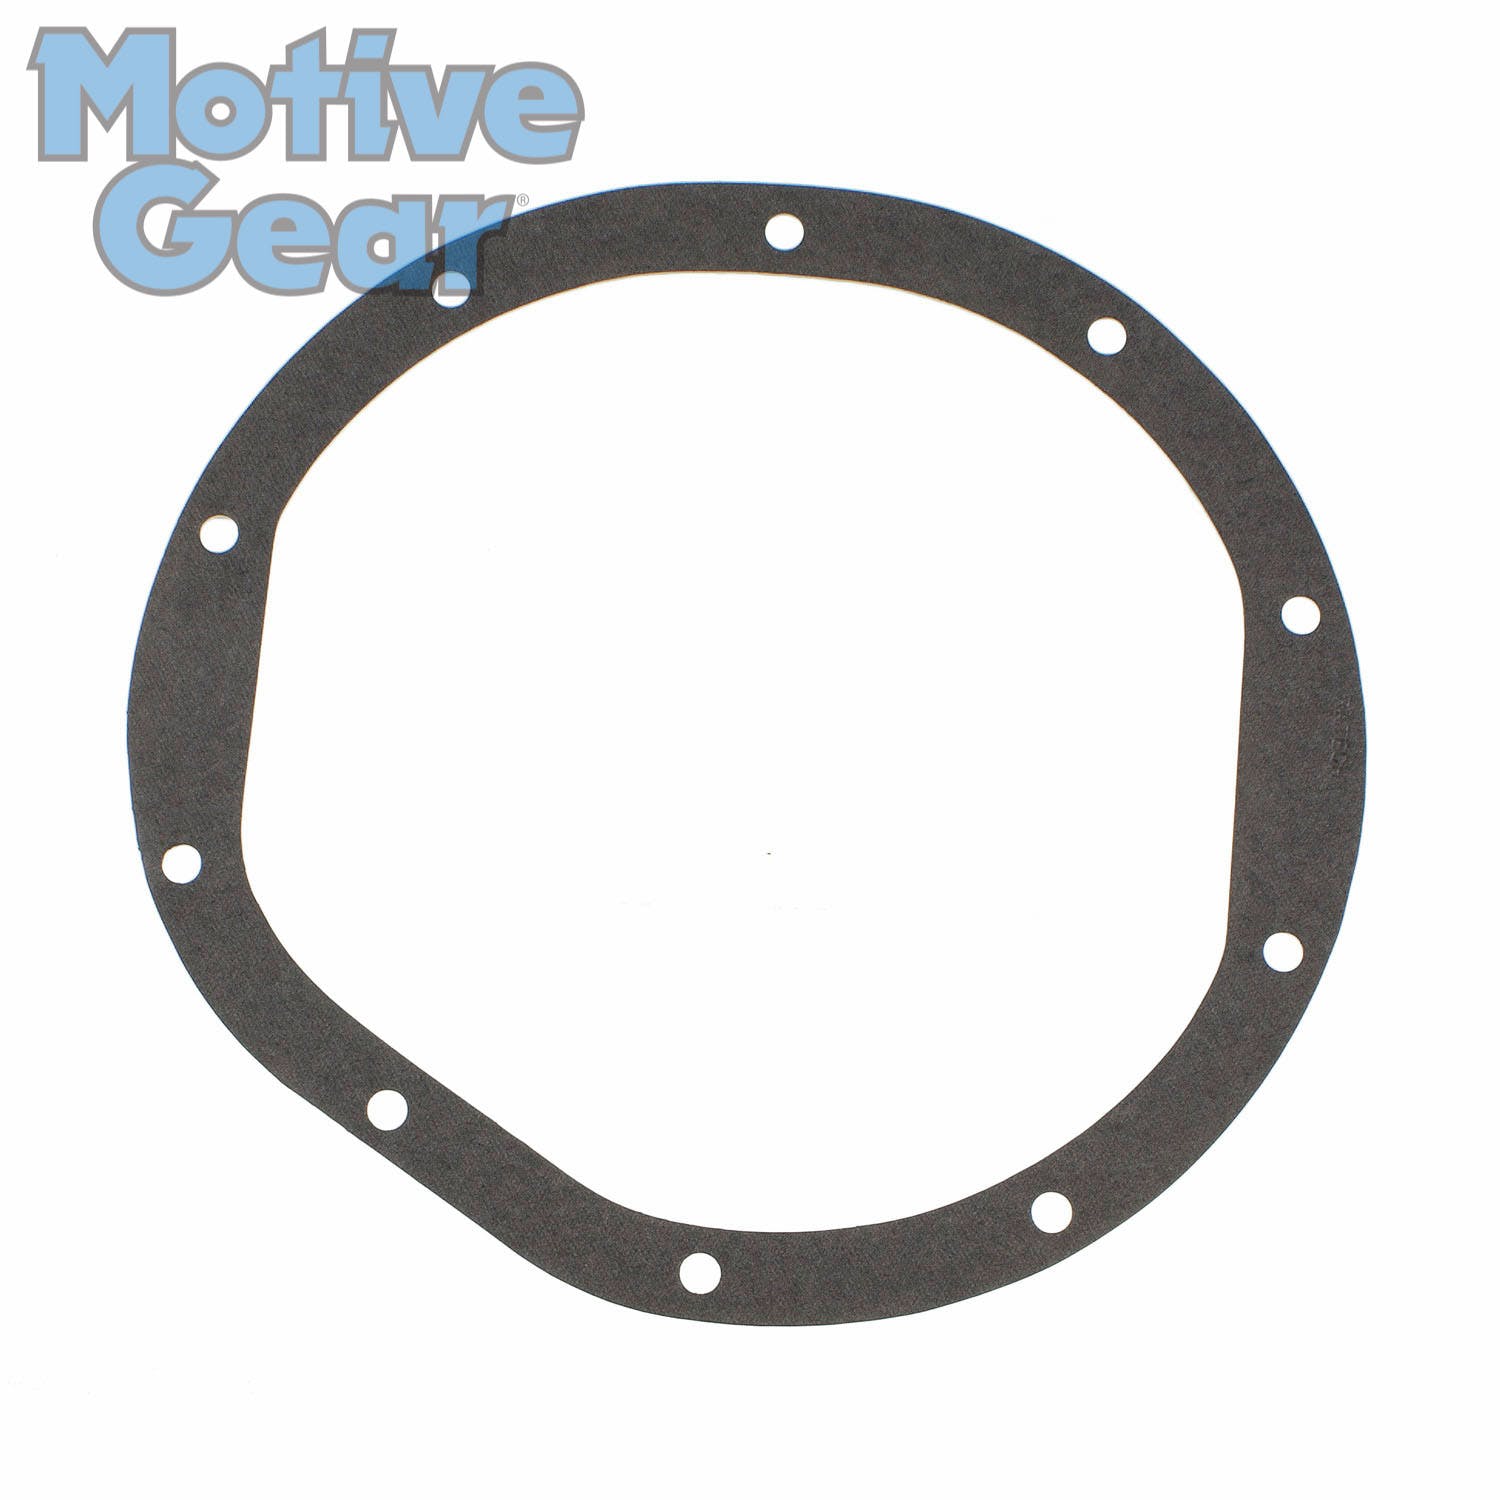 Motive Gear 5111 Differential Cover Gasket